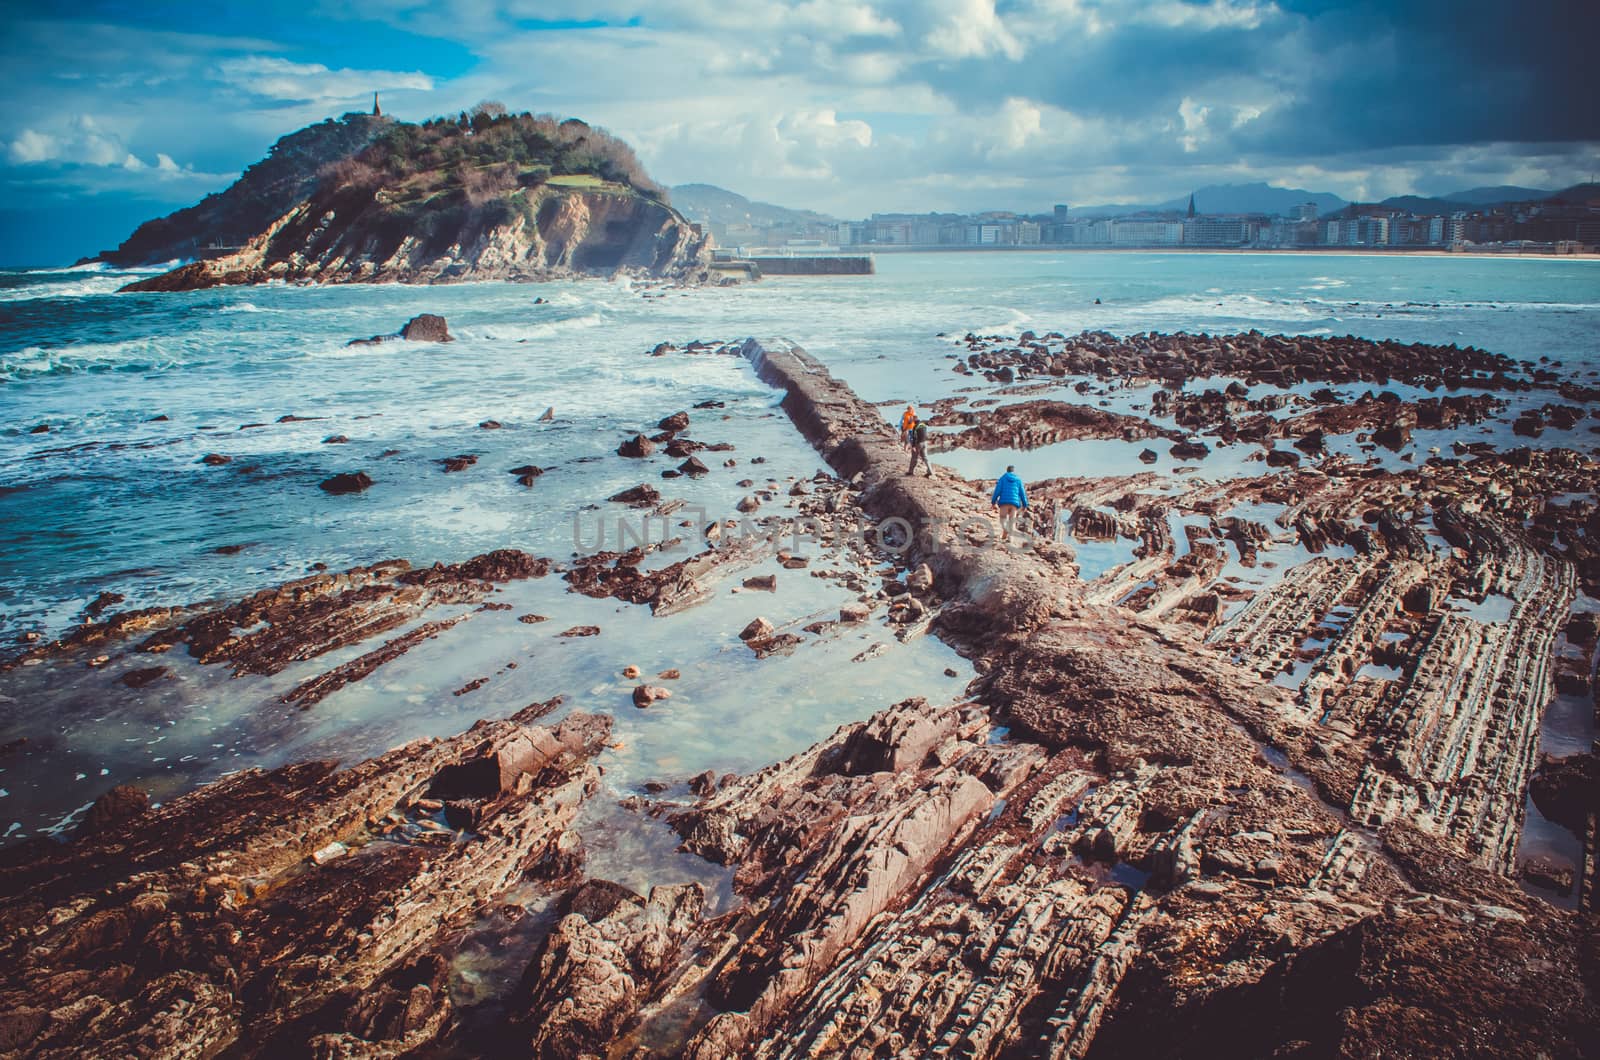 Rock formations on the seabed with Santa Clara island and San Sebastian at the background, Spain by mikelju